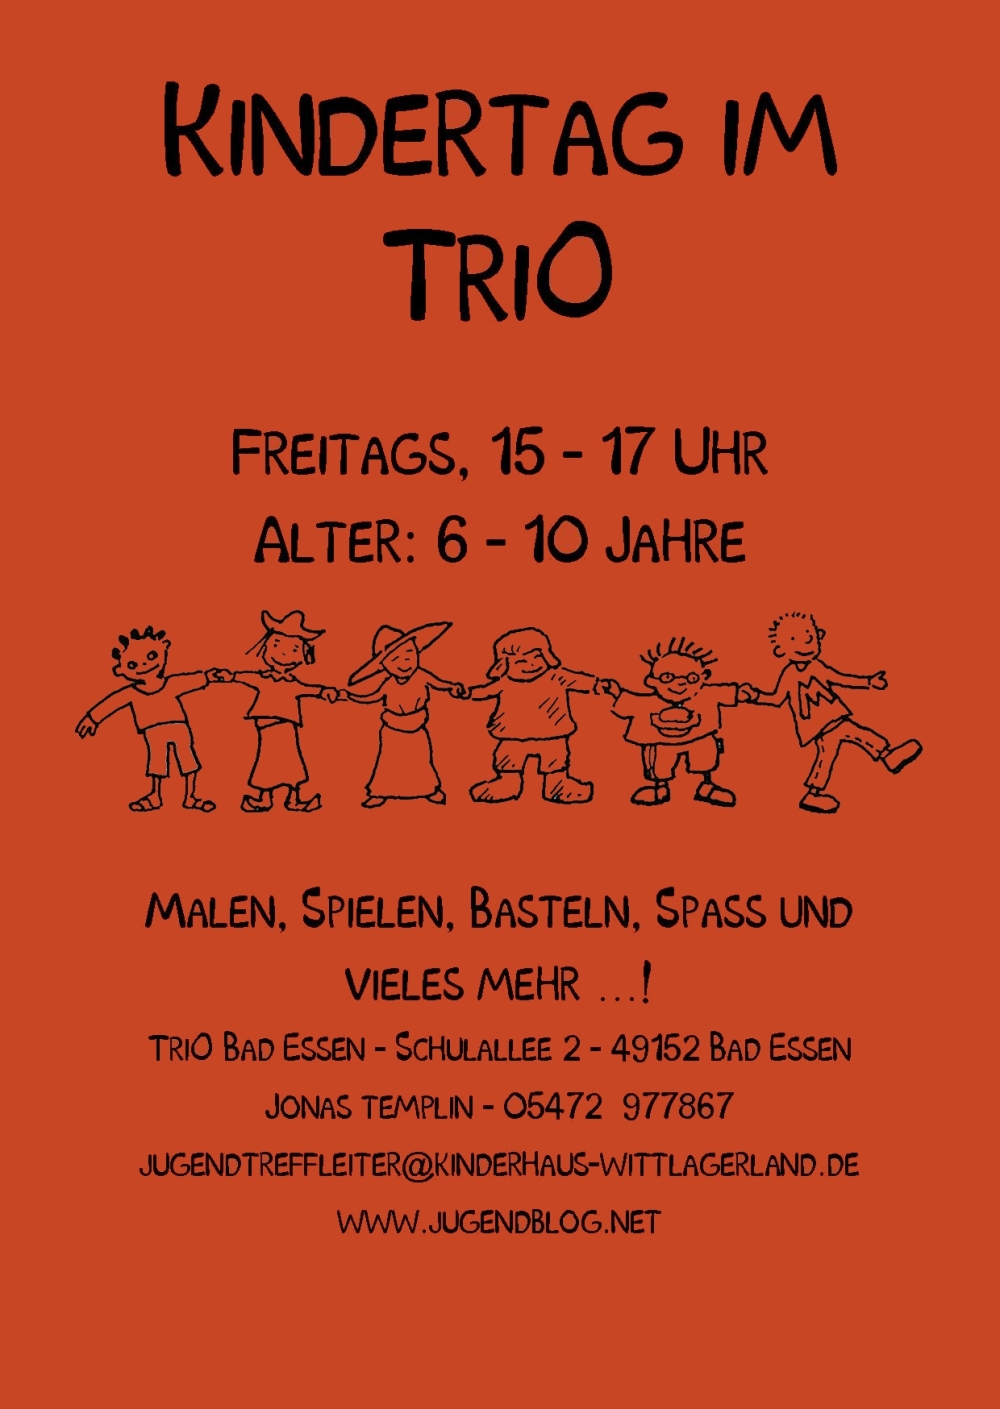 Kindertag TriO Front Publisher 01.2016 rot